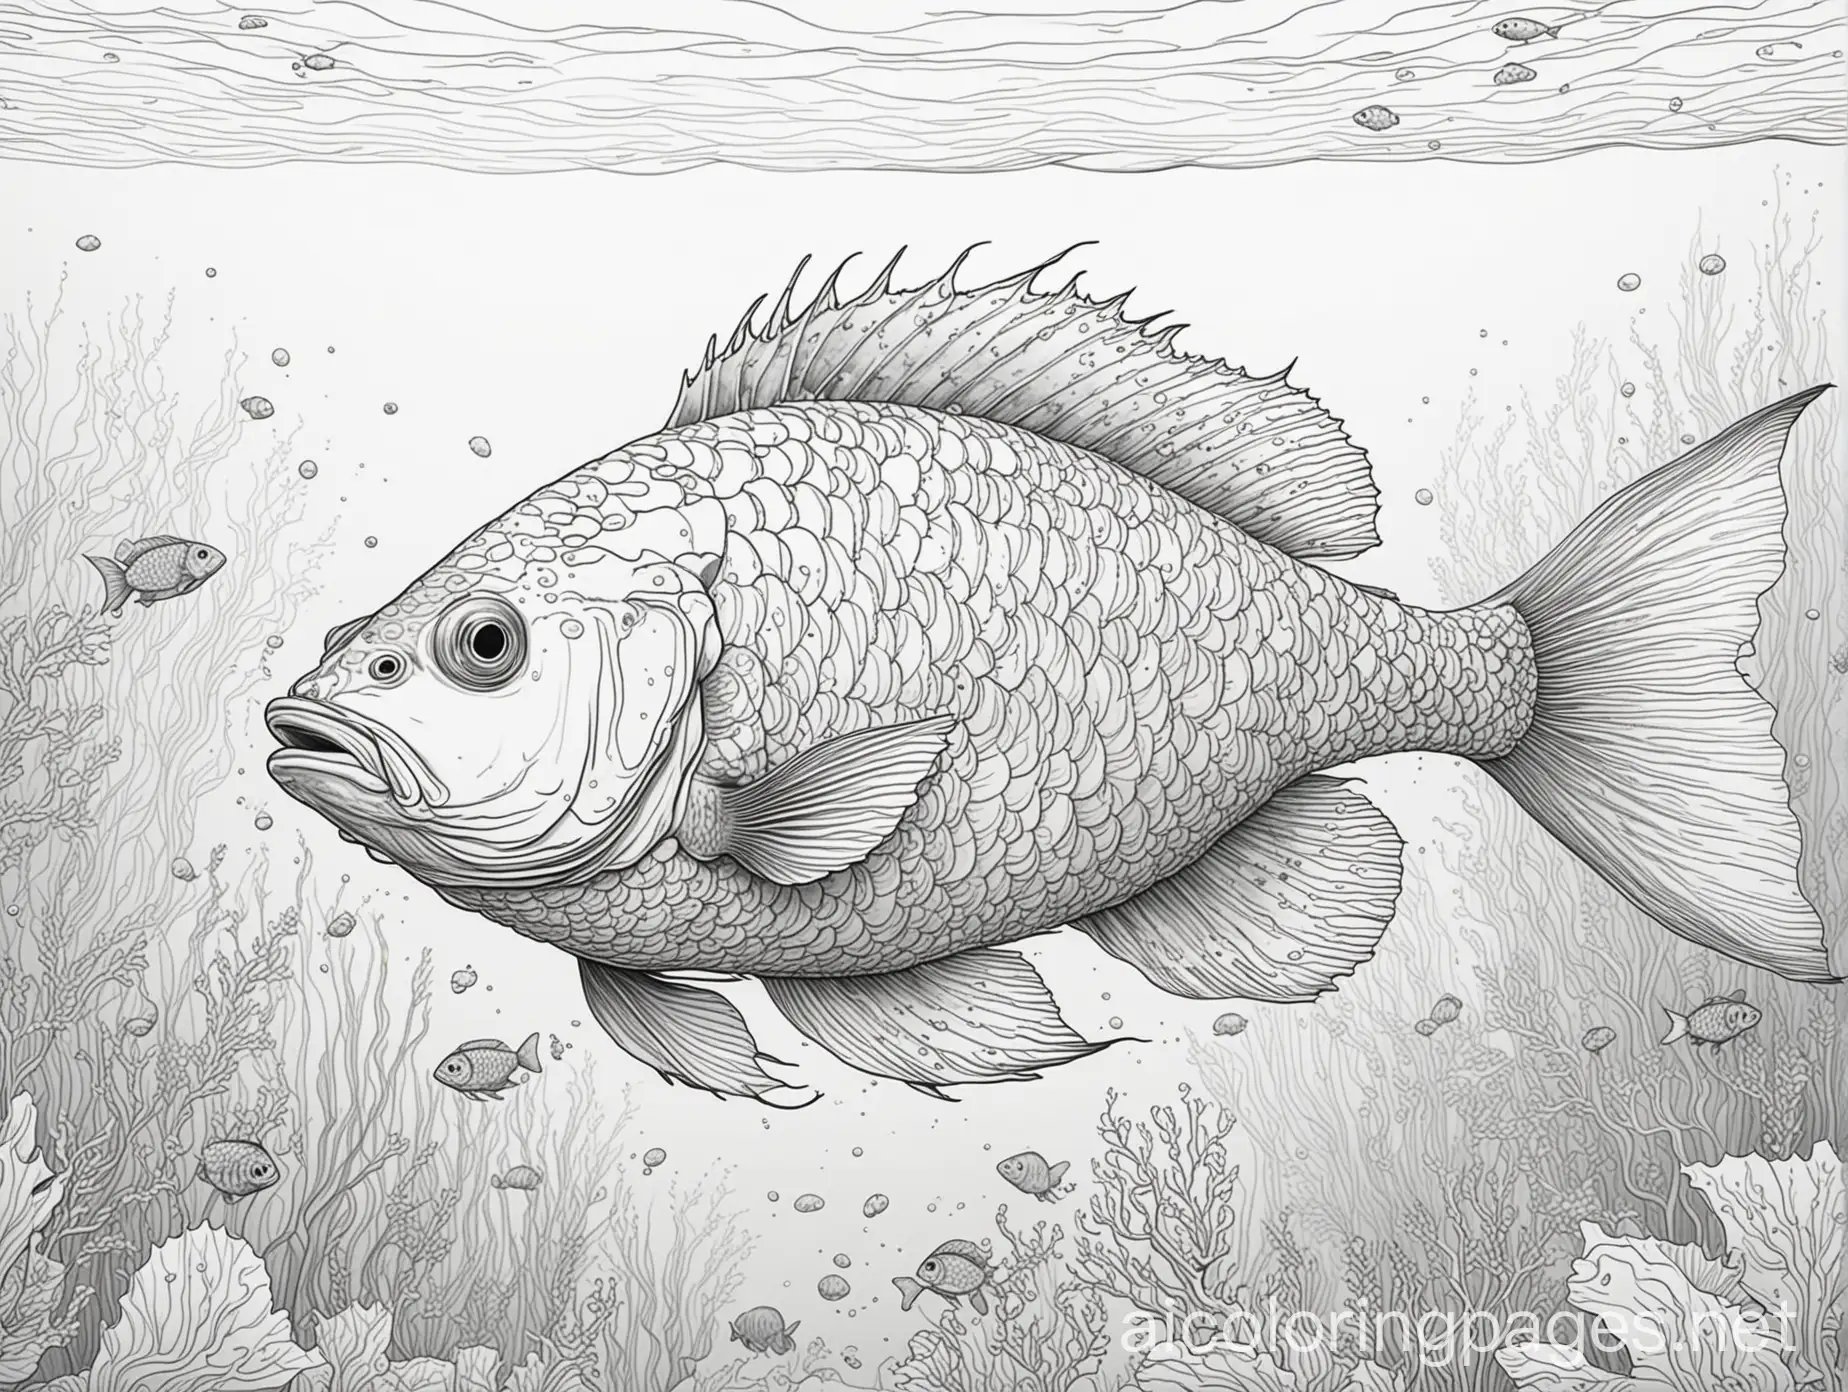 underwater view of a large fish with beautiful scales swimming around other smaller fish in a pond, Coloring Page, black and white, line art, white background, Simplicity, Ample White Space. The background of the coloring page is plain white to make it easy for young children to color within the lines. The outlines of all the subjects are easy to distinguish, making it simple for kids to color without too much difficulty